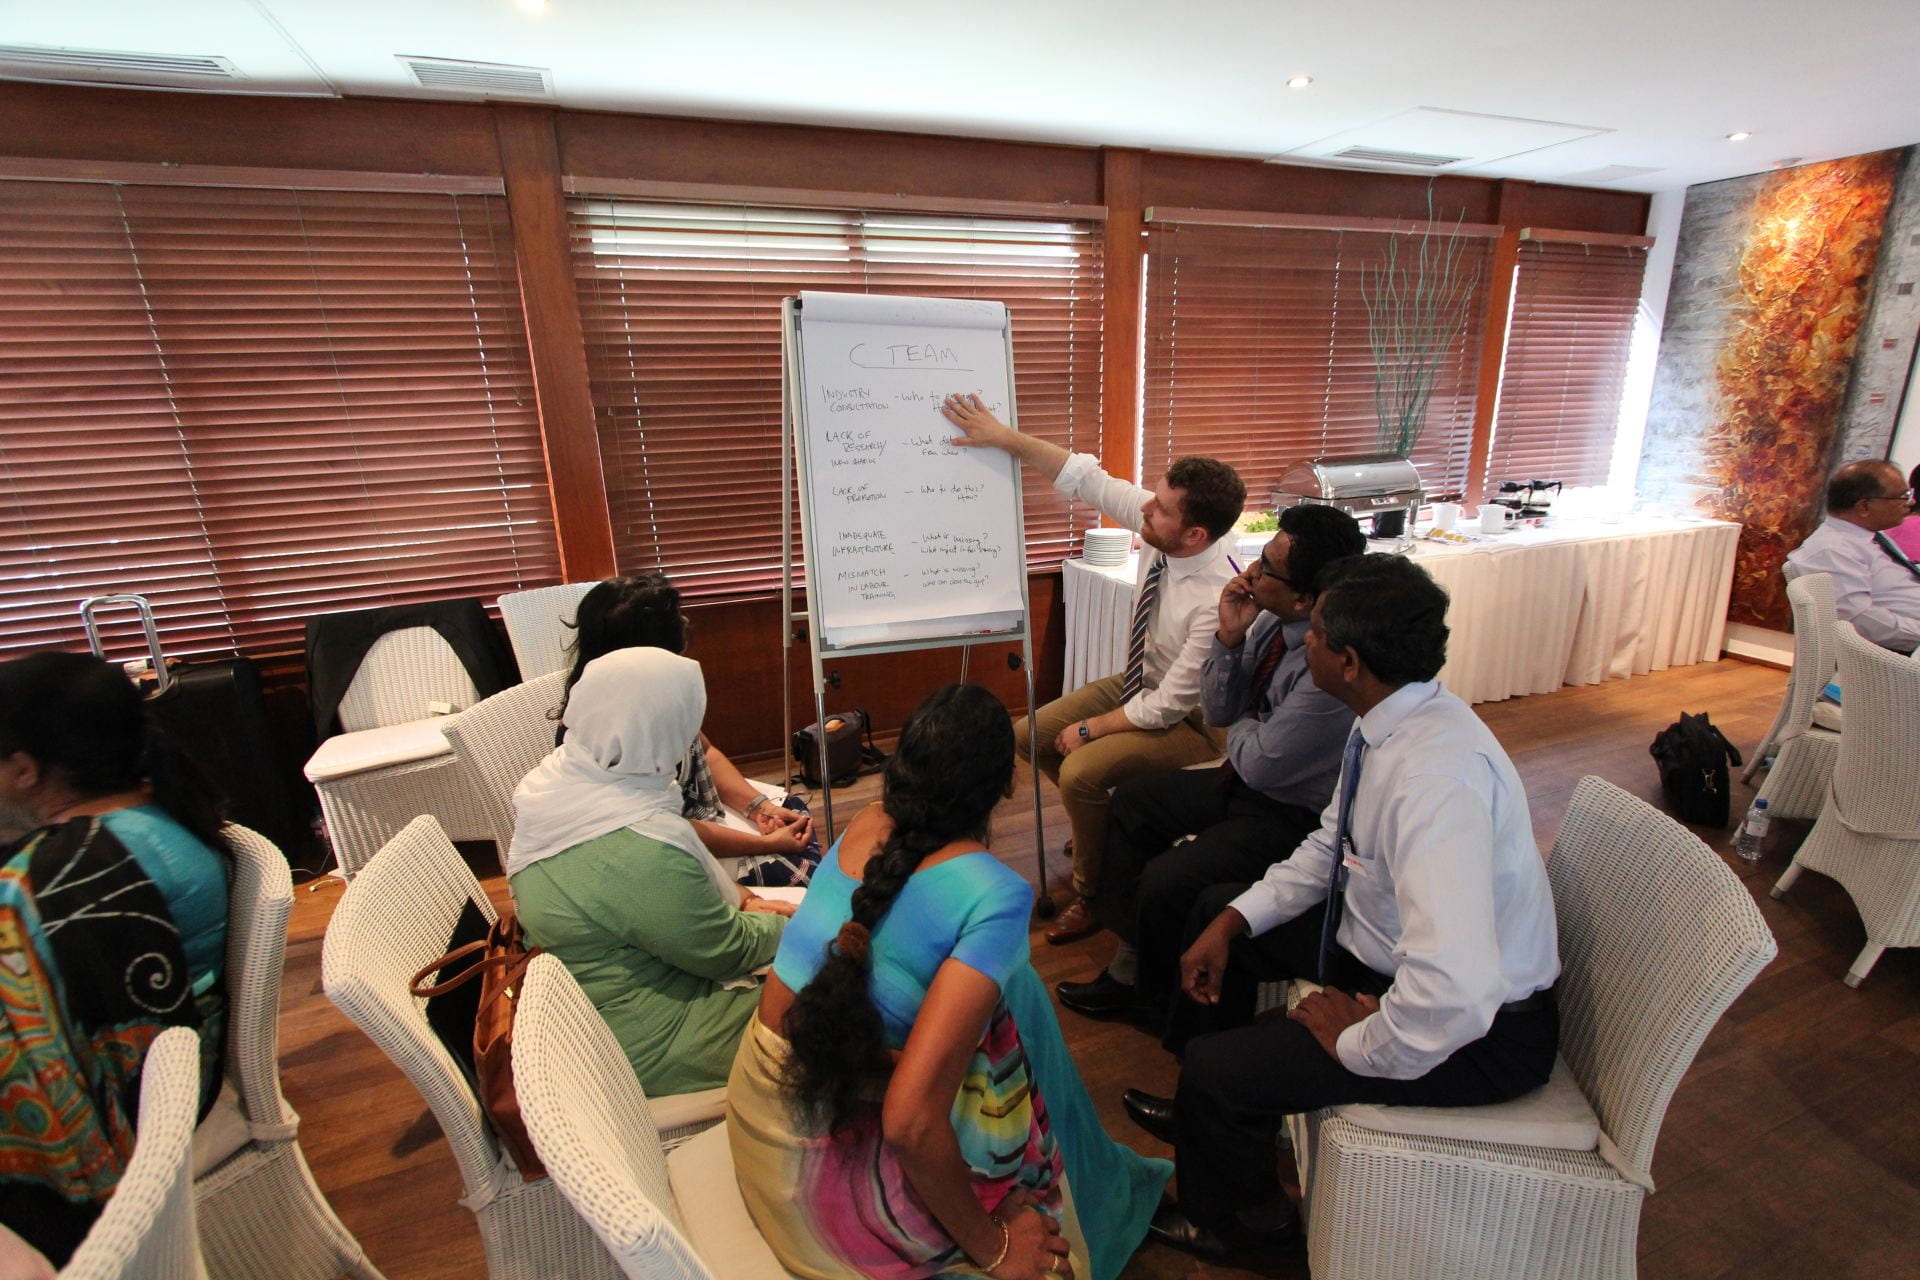 Sri Lanka participants with Peter Harrington pointing at a white board